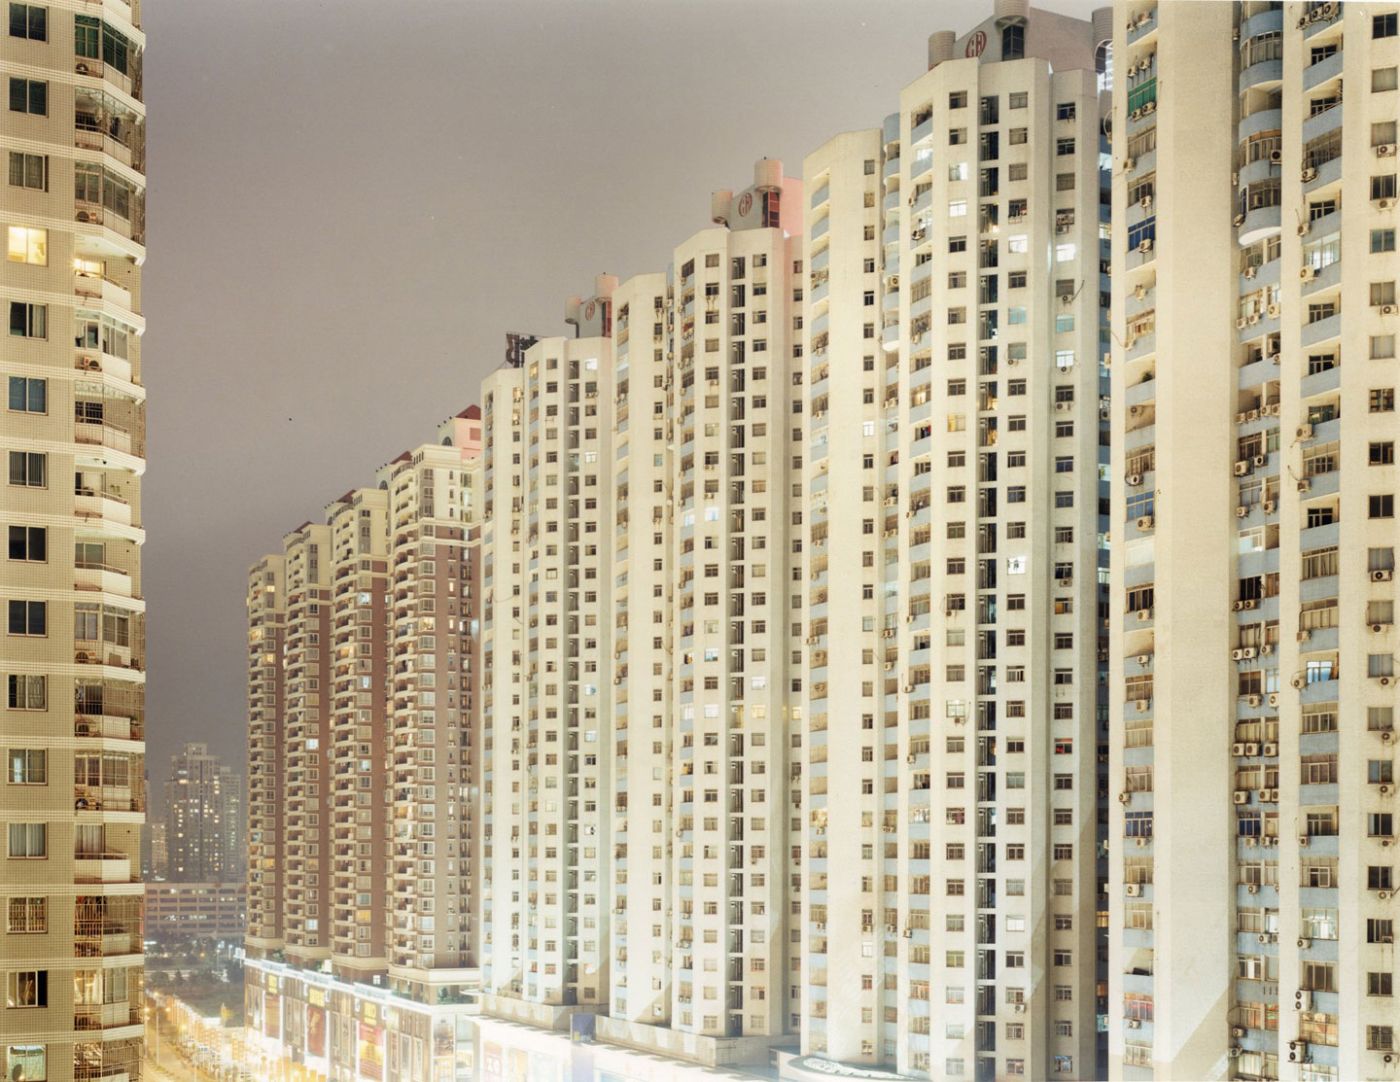 Peter Bialobrzeski: Neon Tigers: Photographs of Asian Megacities, Limited Edition (with Type-C Print "Shenzhen, 2001")